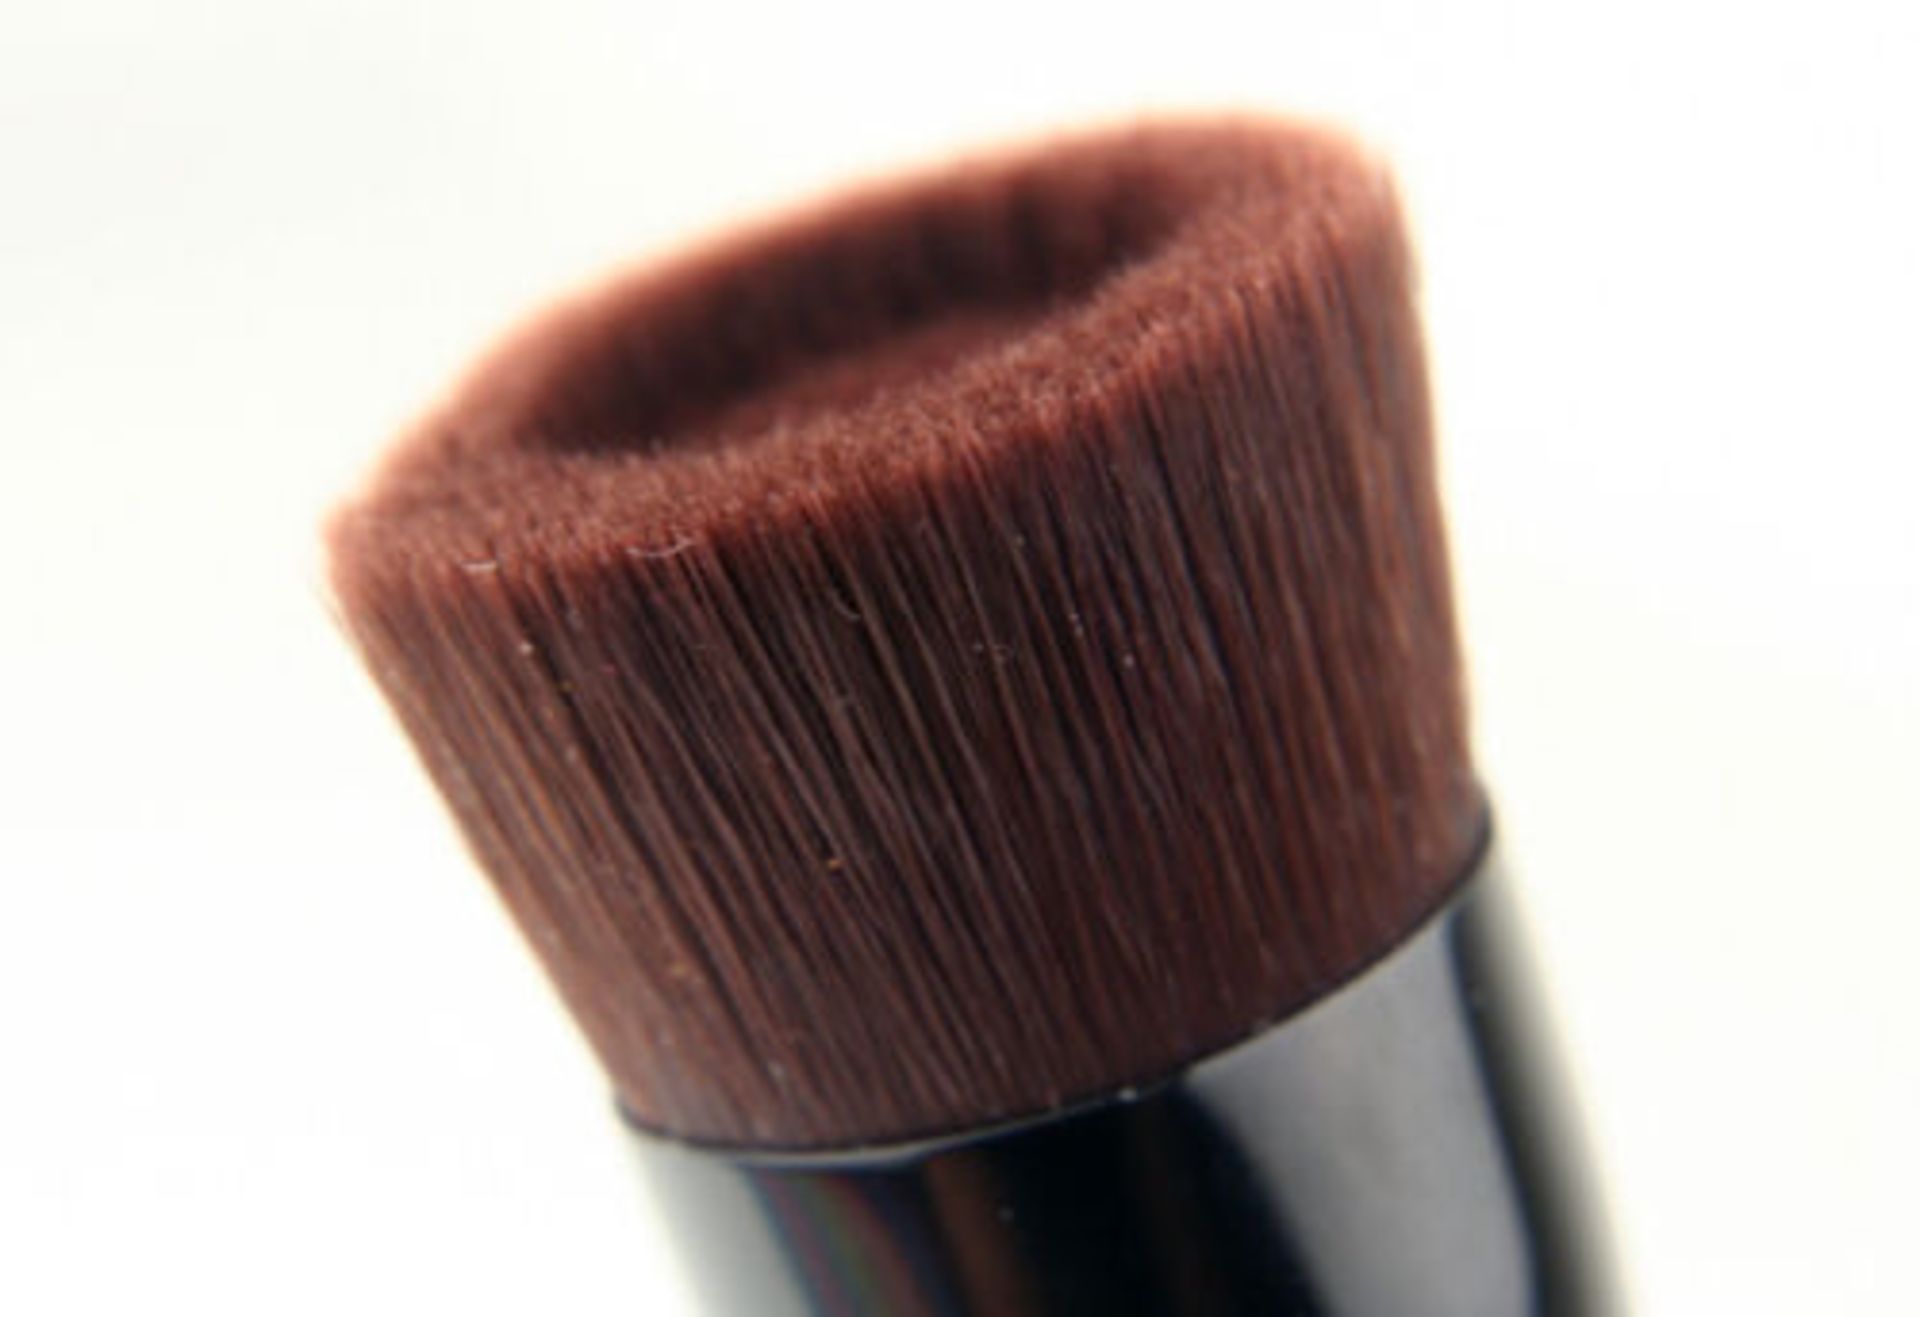 1 x Bare Escentuals bareMinerals “BARESKIN” Perfecting Face Brush - Genuine Product - Brand New - Image 3 of 3